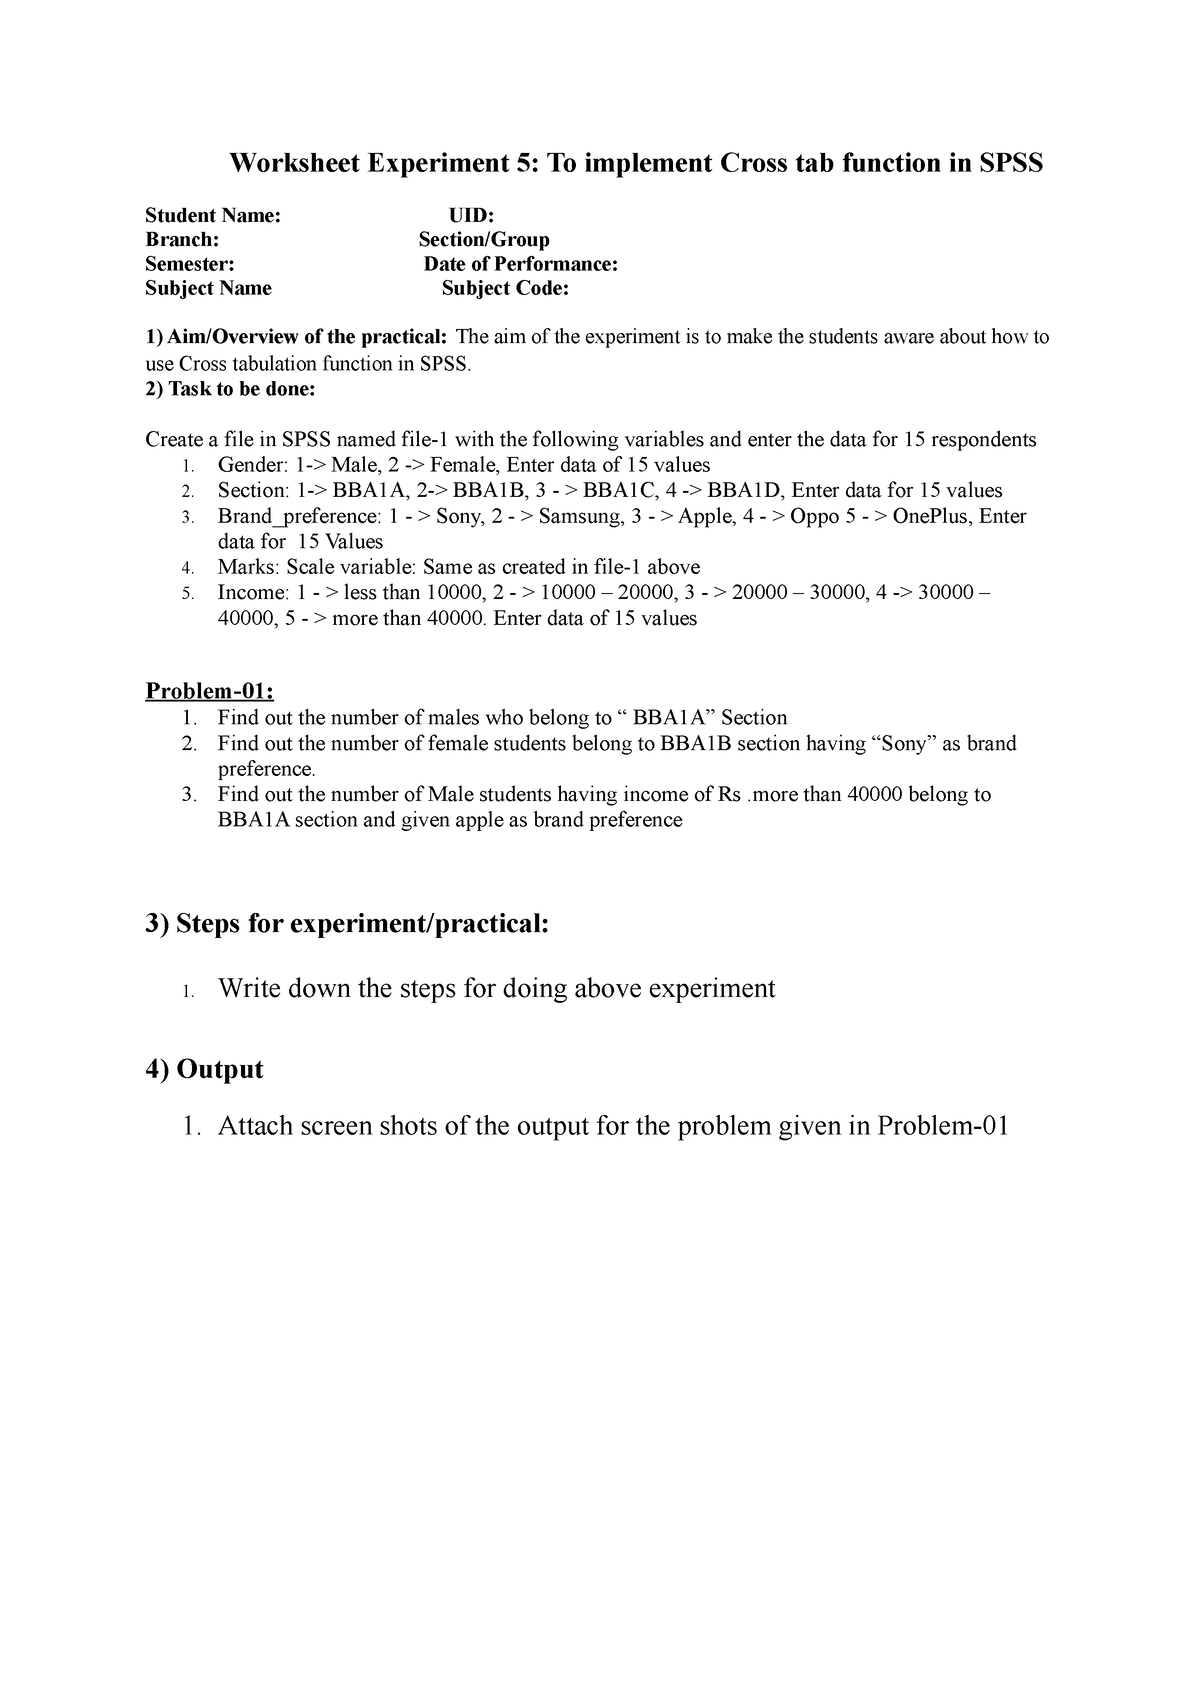 worksheet-5-spss-worksheet-experiment-5-to-implement-cross-tab-function-in-spss-student